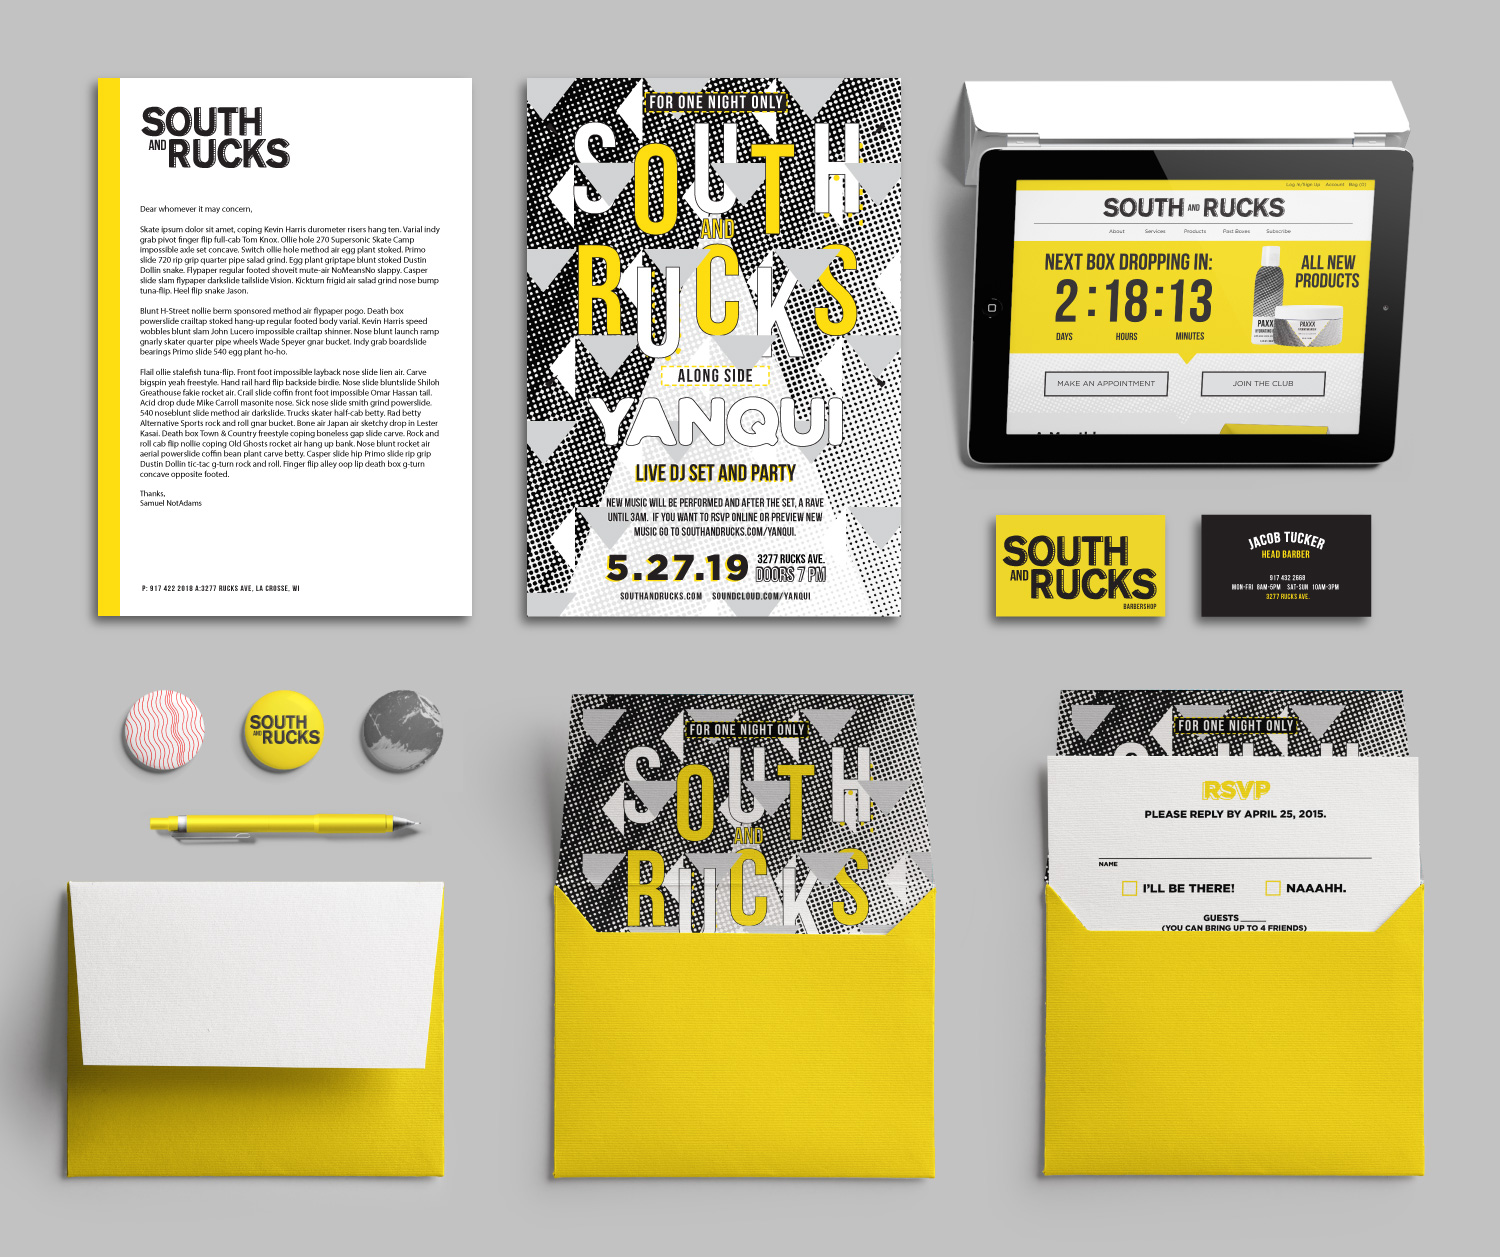 A collection of Printed Materials for the South and Rucks Launch